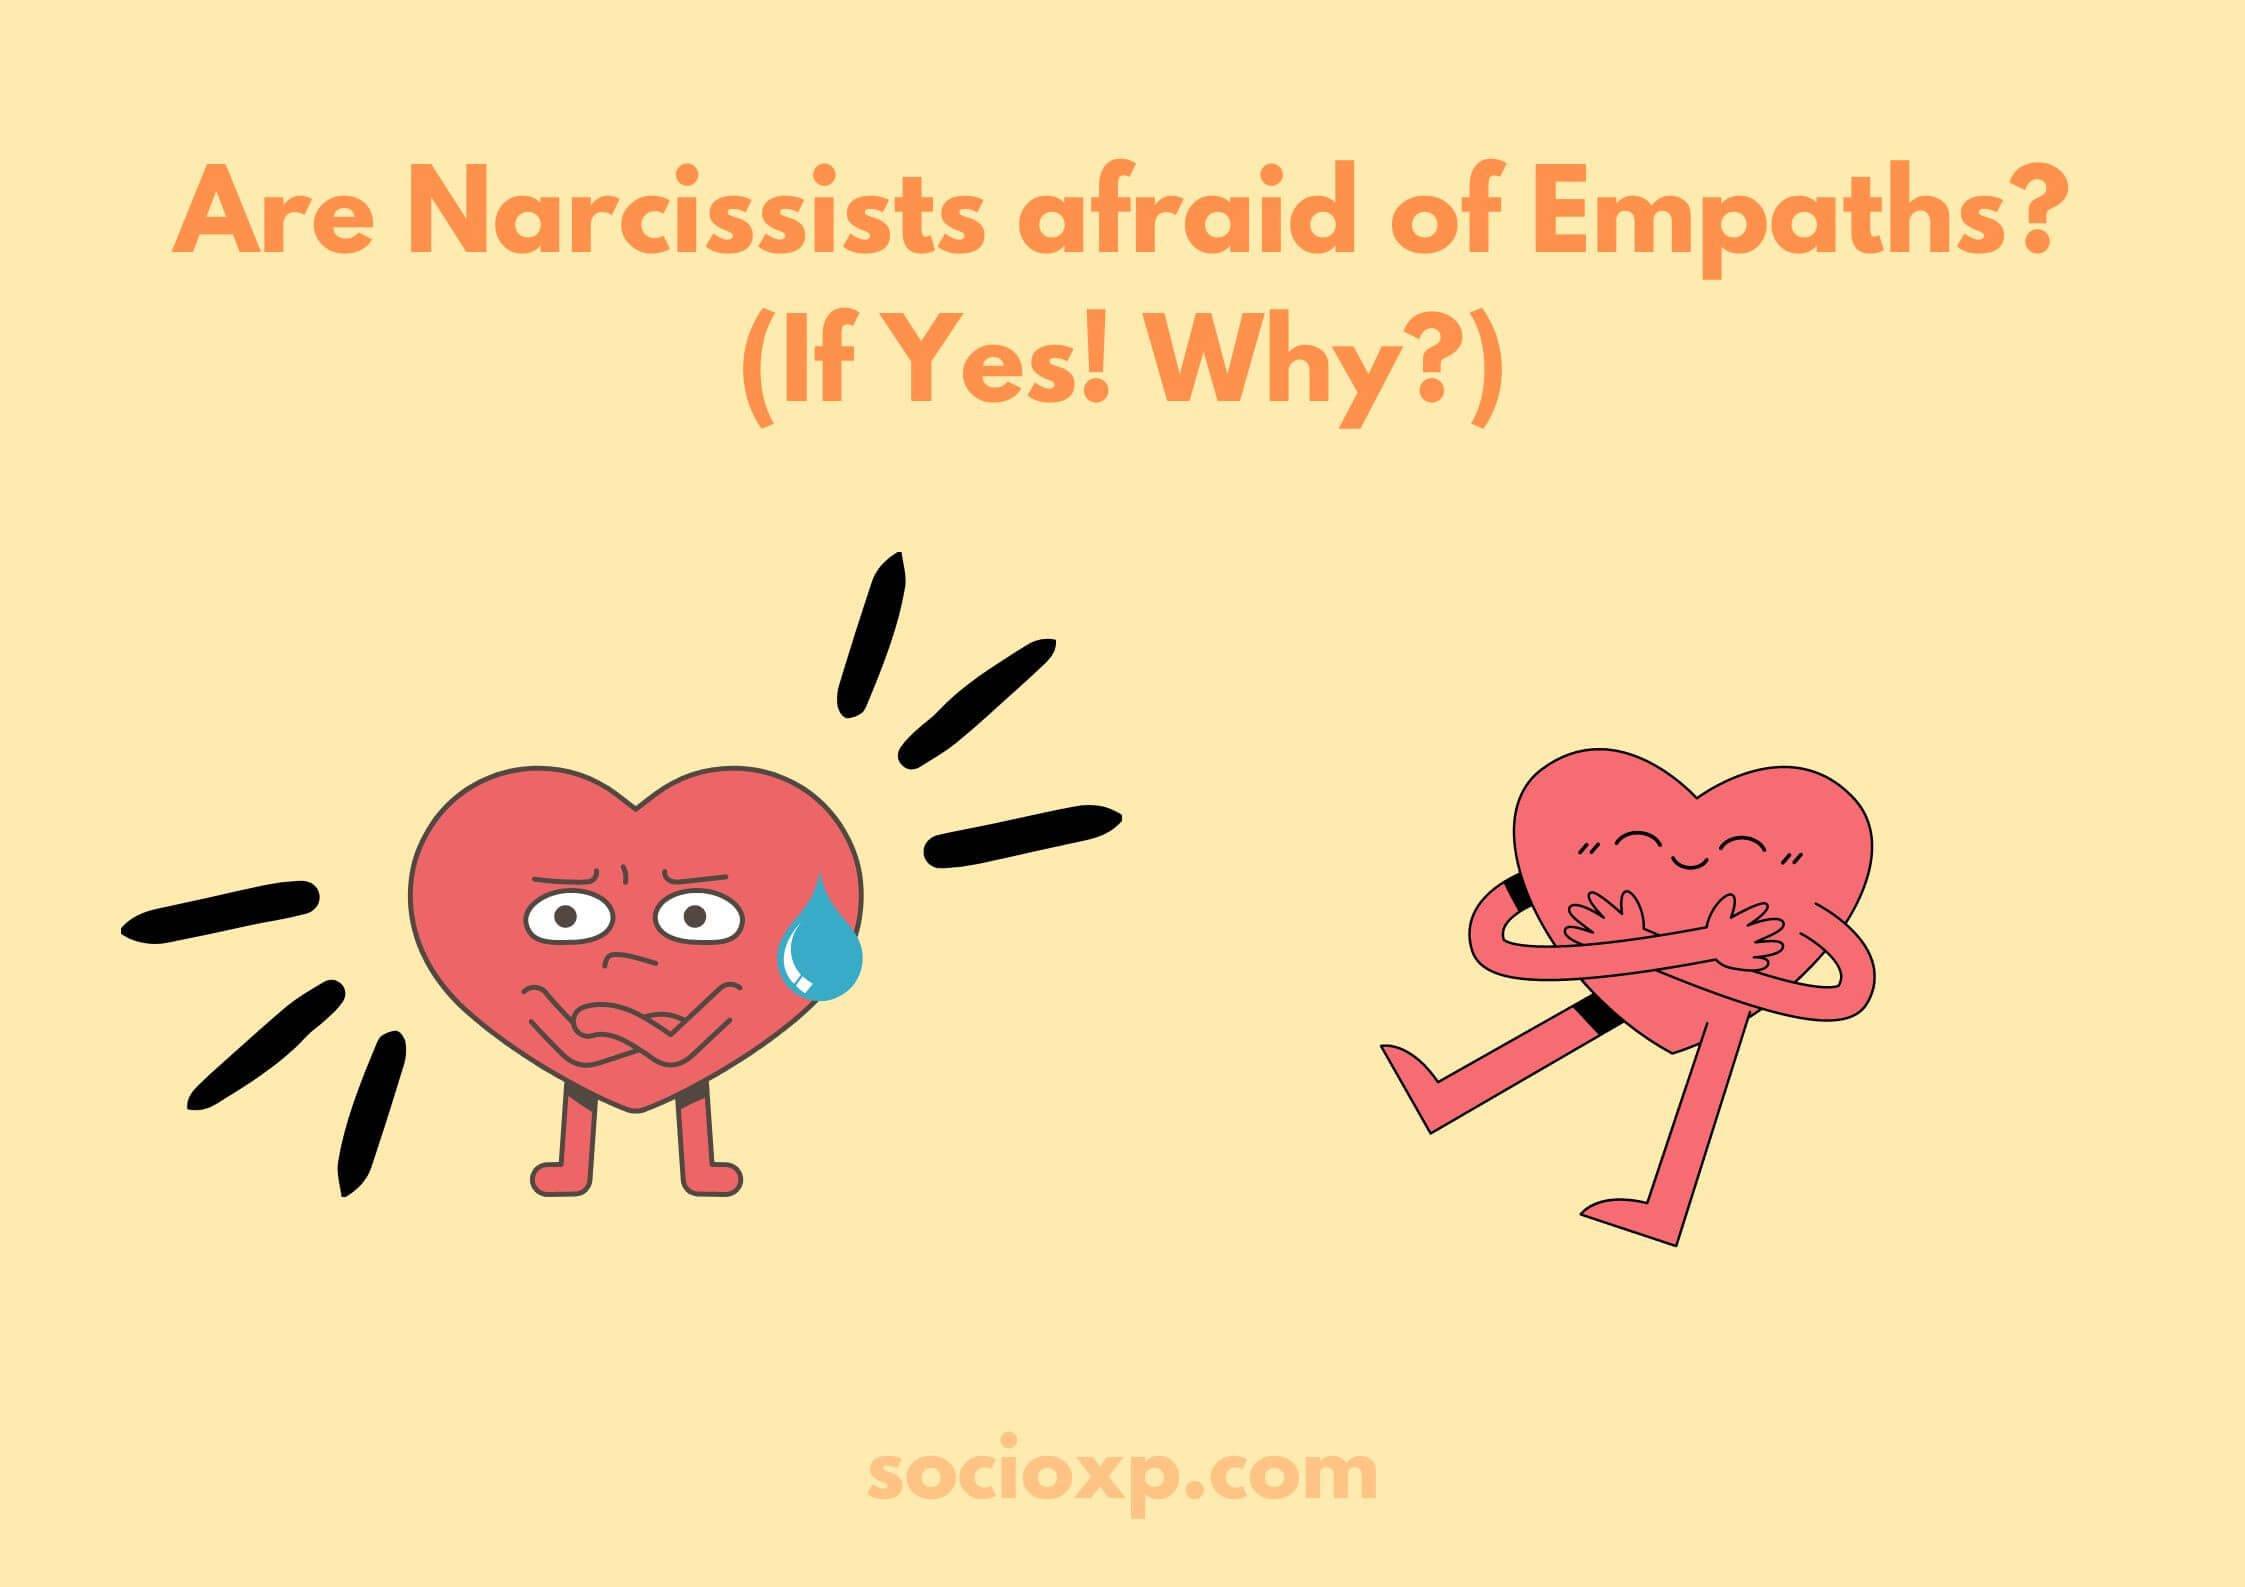 Are Narcissists Afraid of Empaths? (If Yes! Why?)